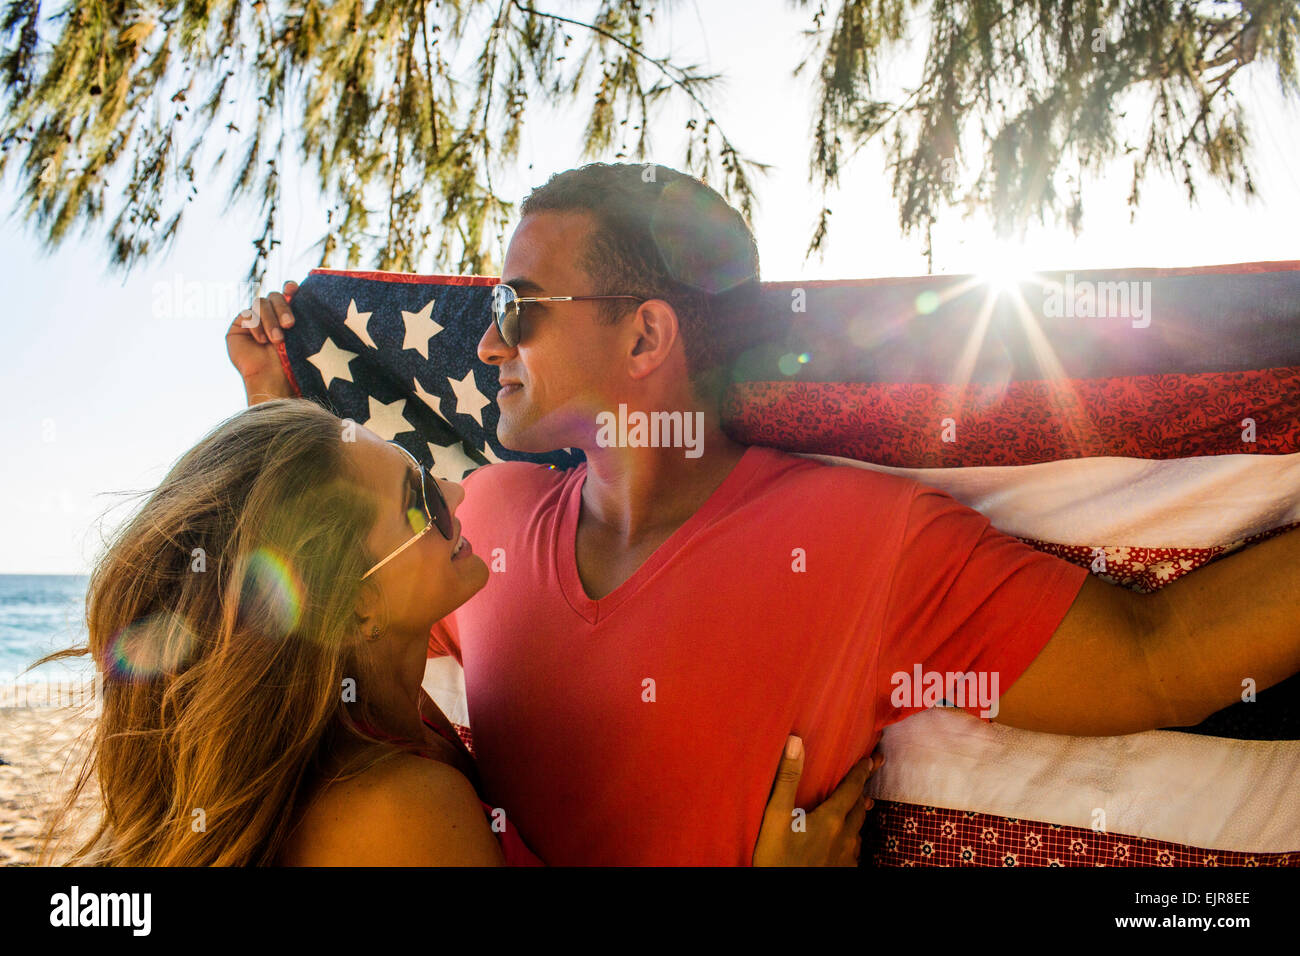 Couple holding American flag quilt Stock Photo